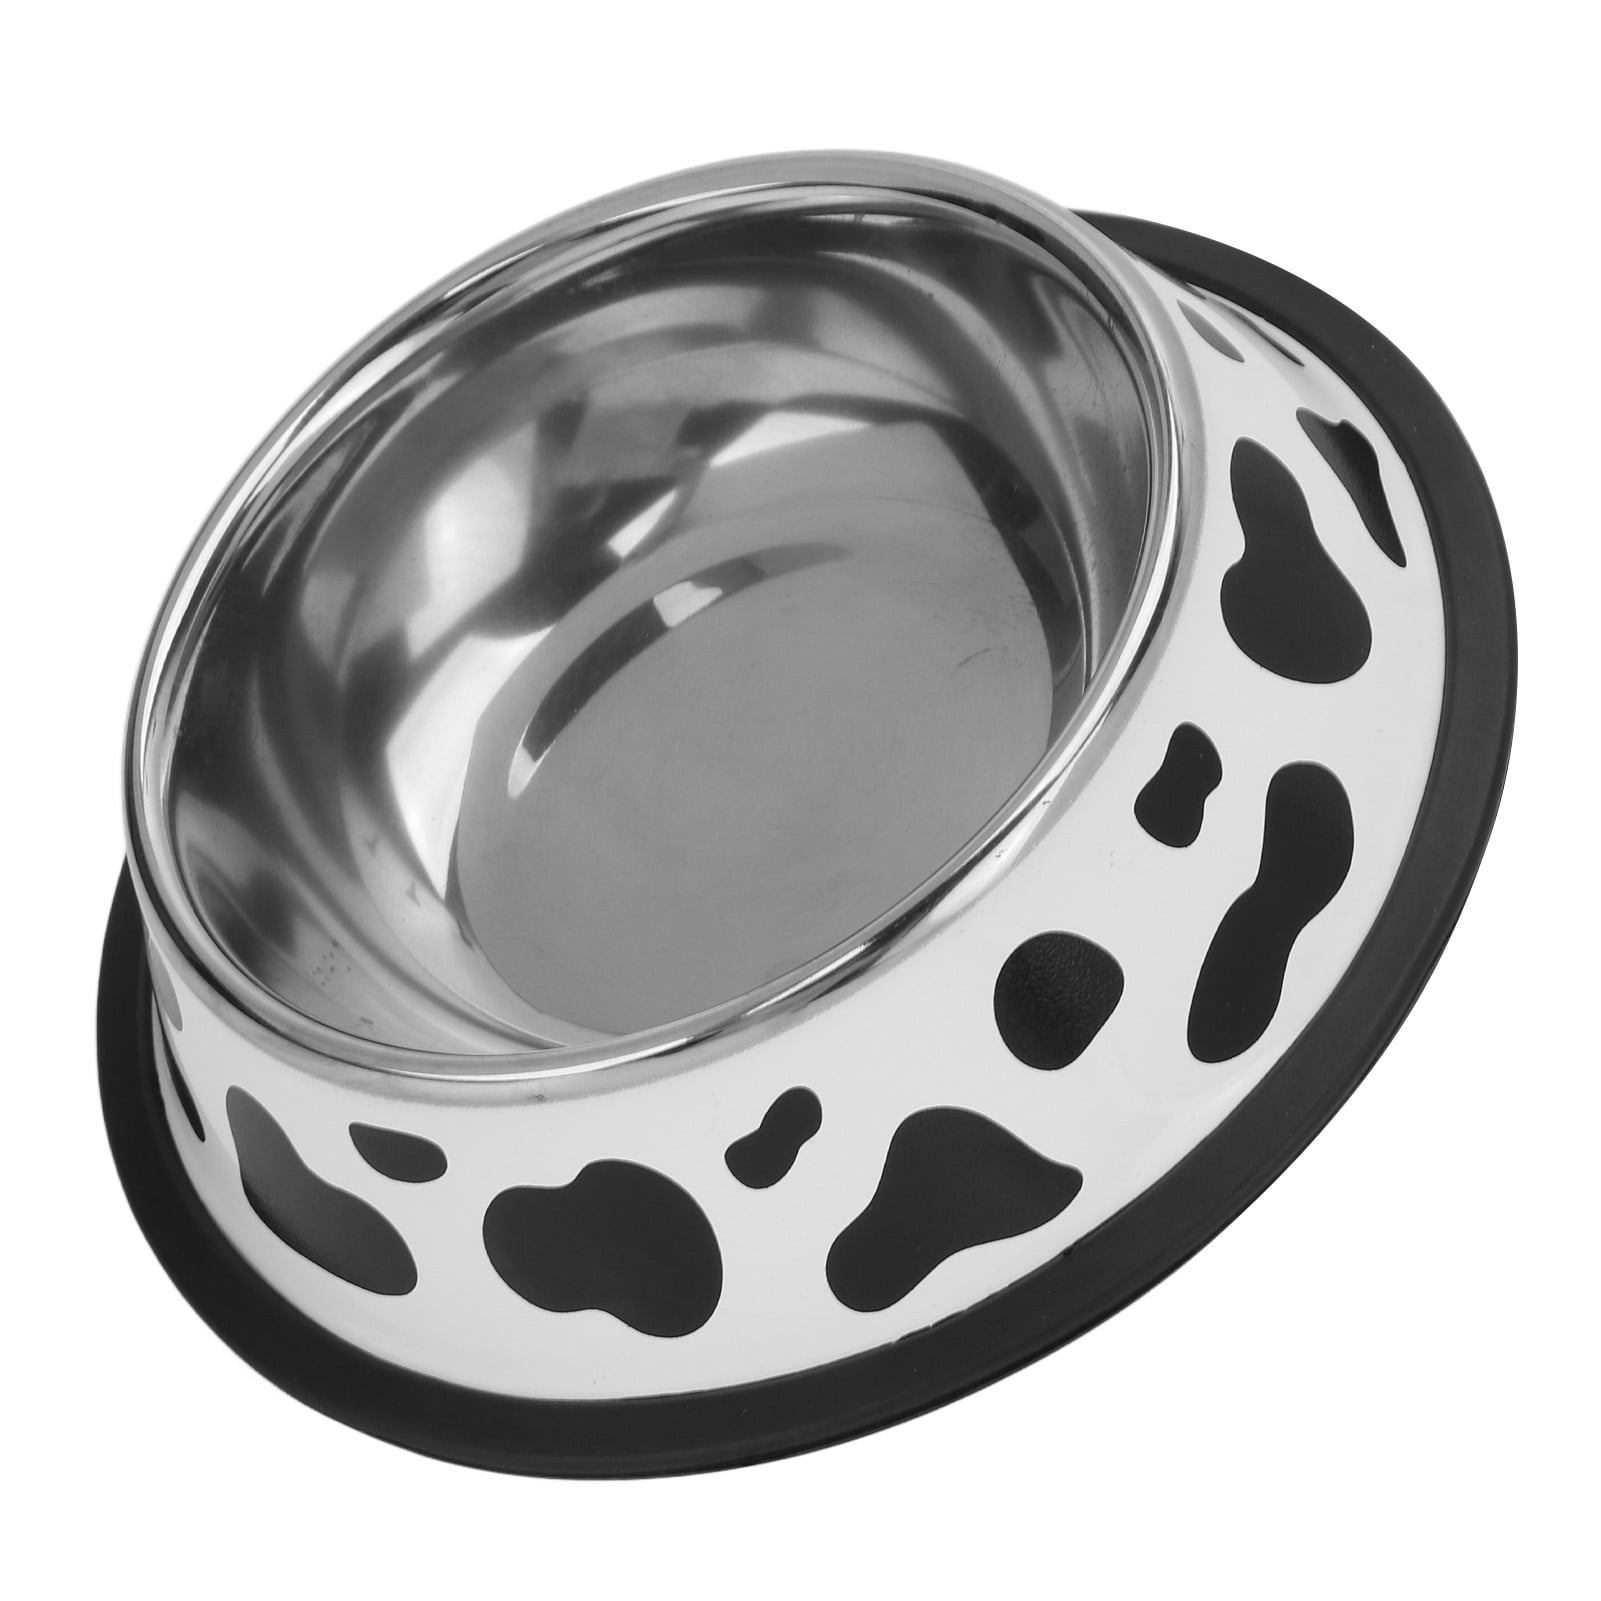 Bent & Freck Dog Food Bowls for Small Dogs Cats - Stainless Steel